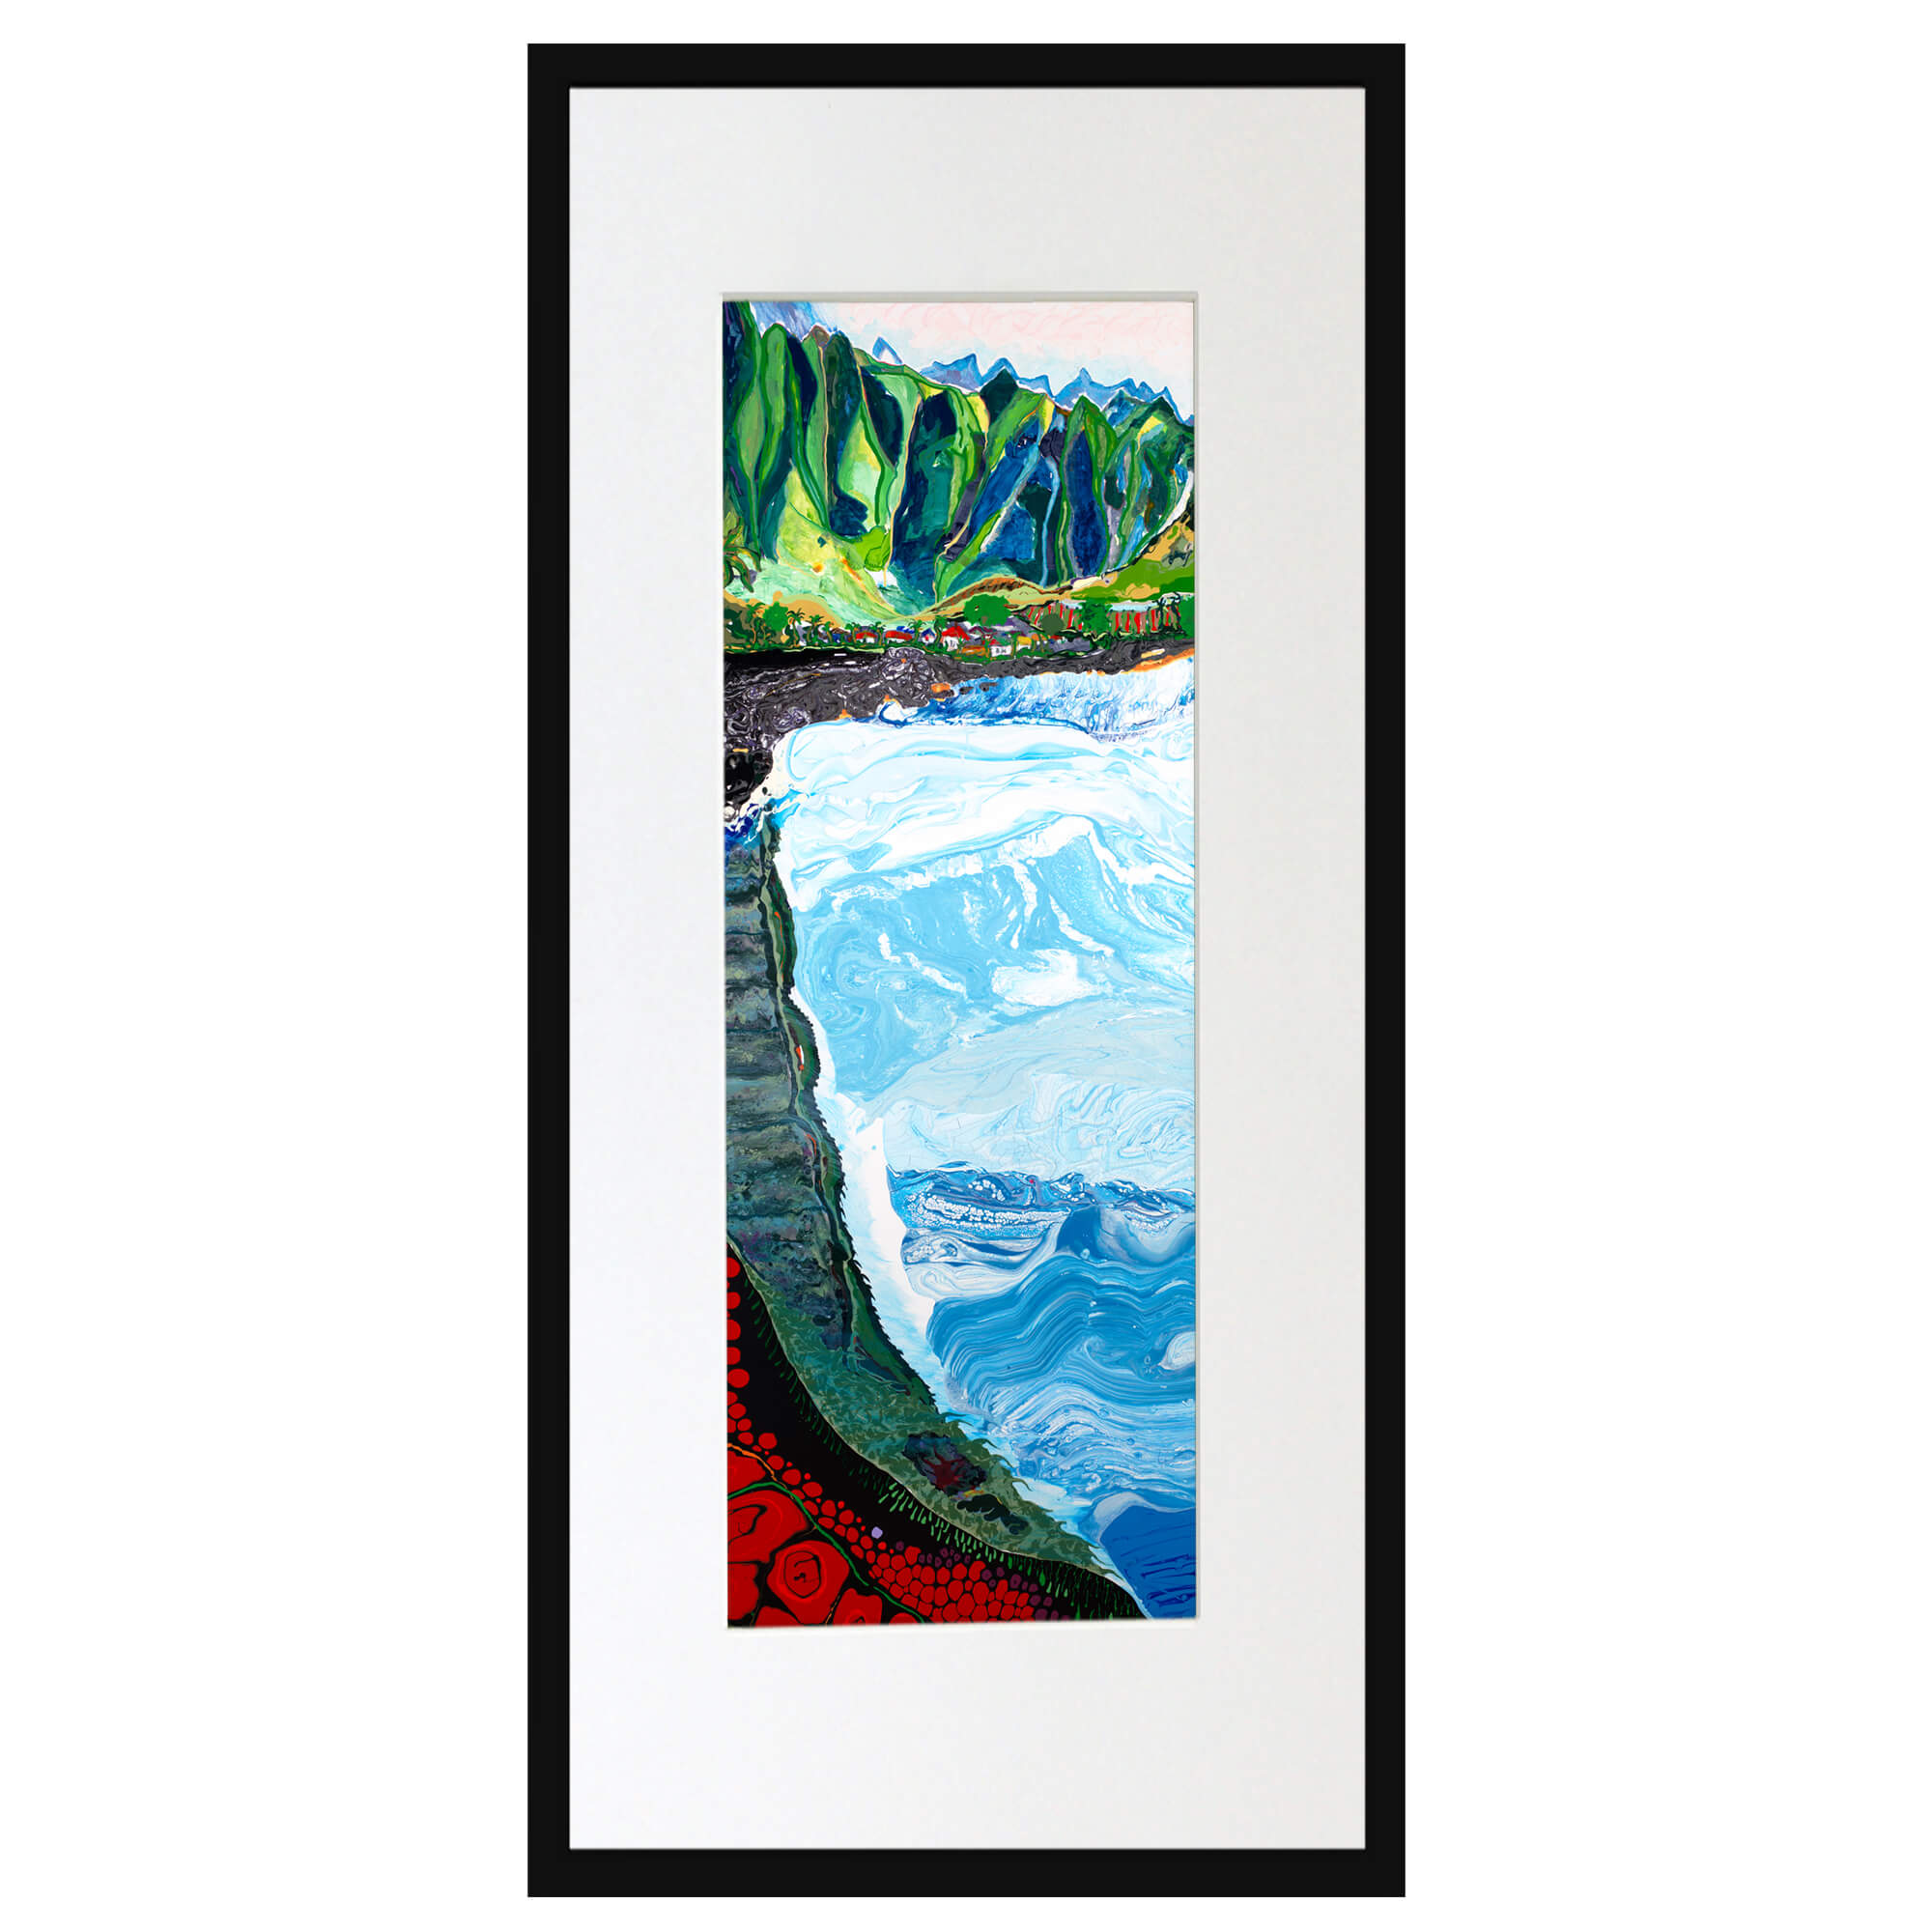 matted art print featuring green mountain with large crashing wave by Hawaii artist Robert Hazzard